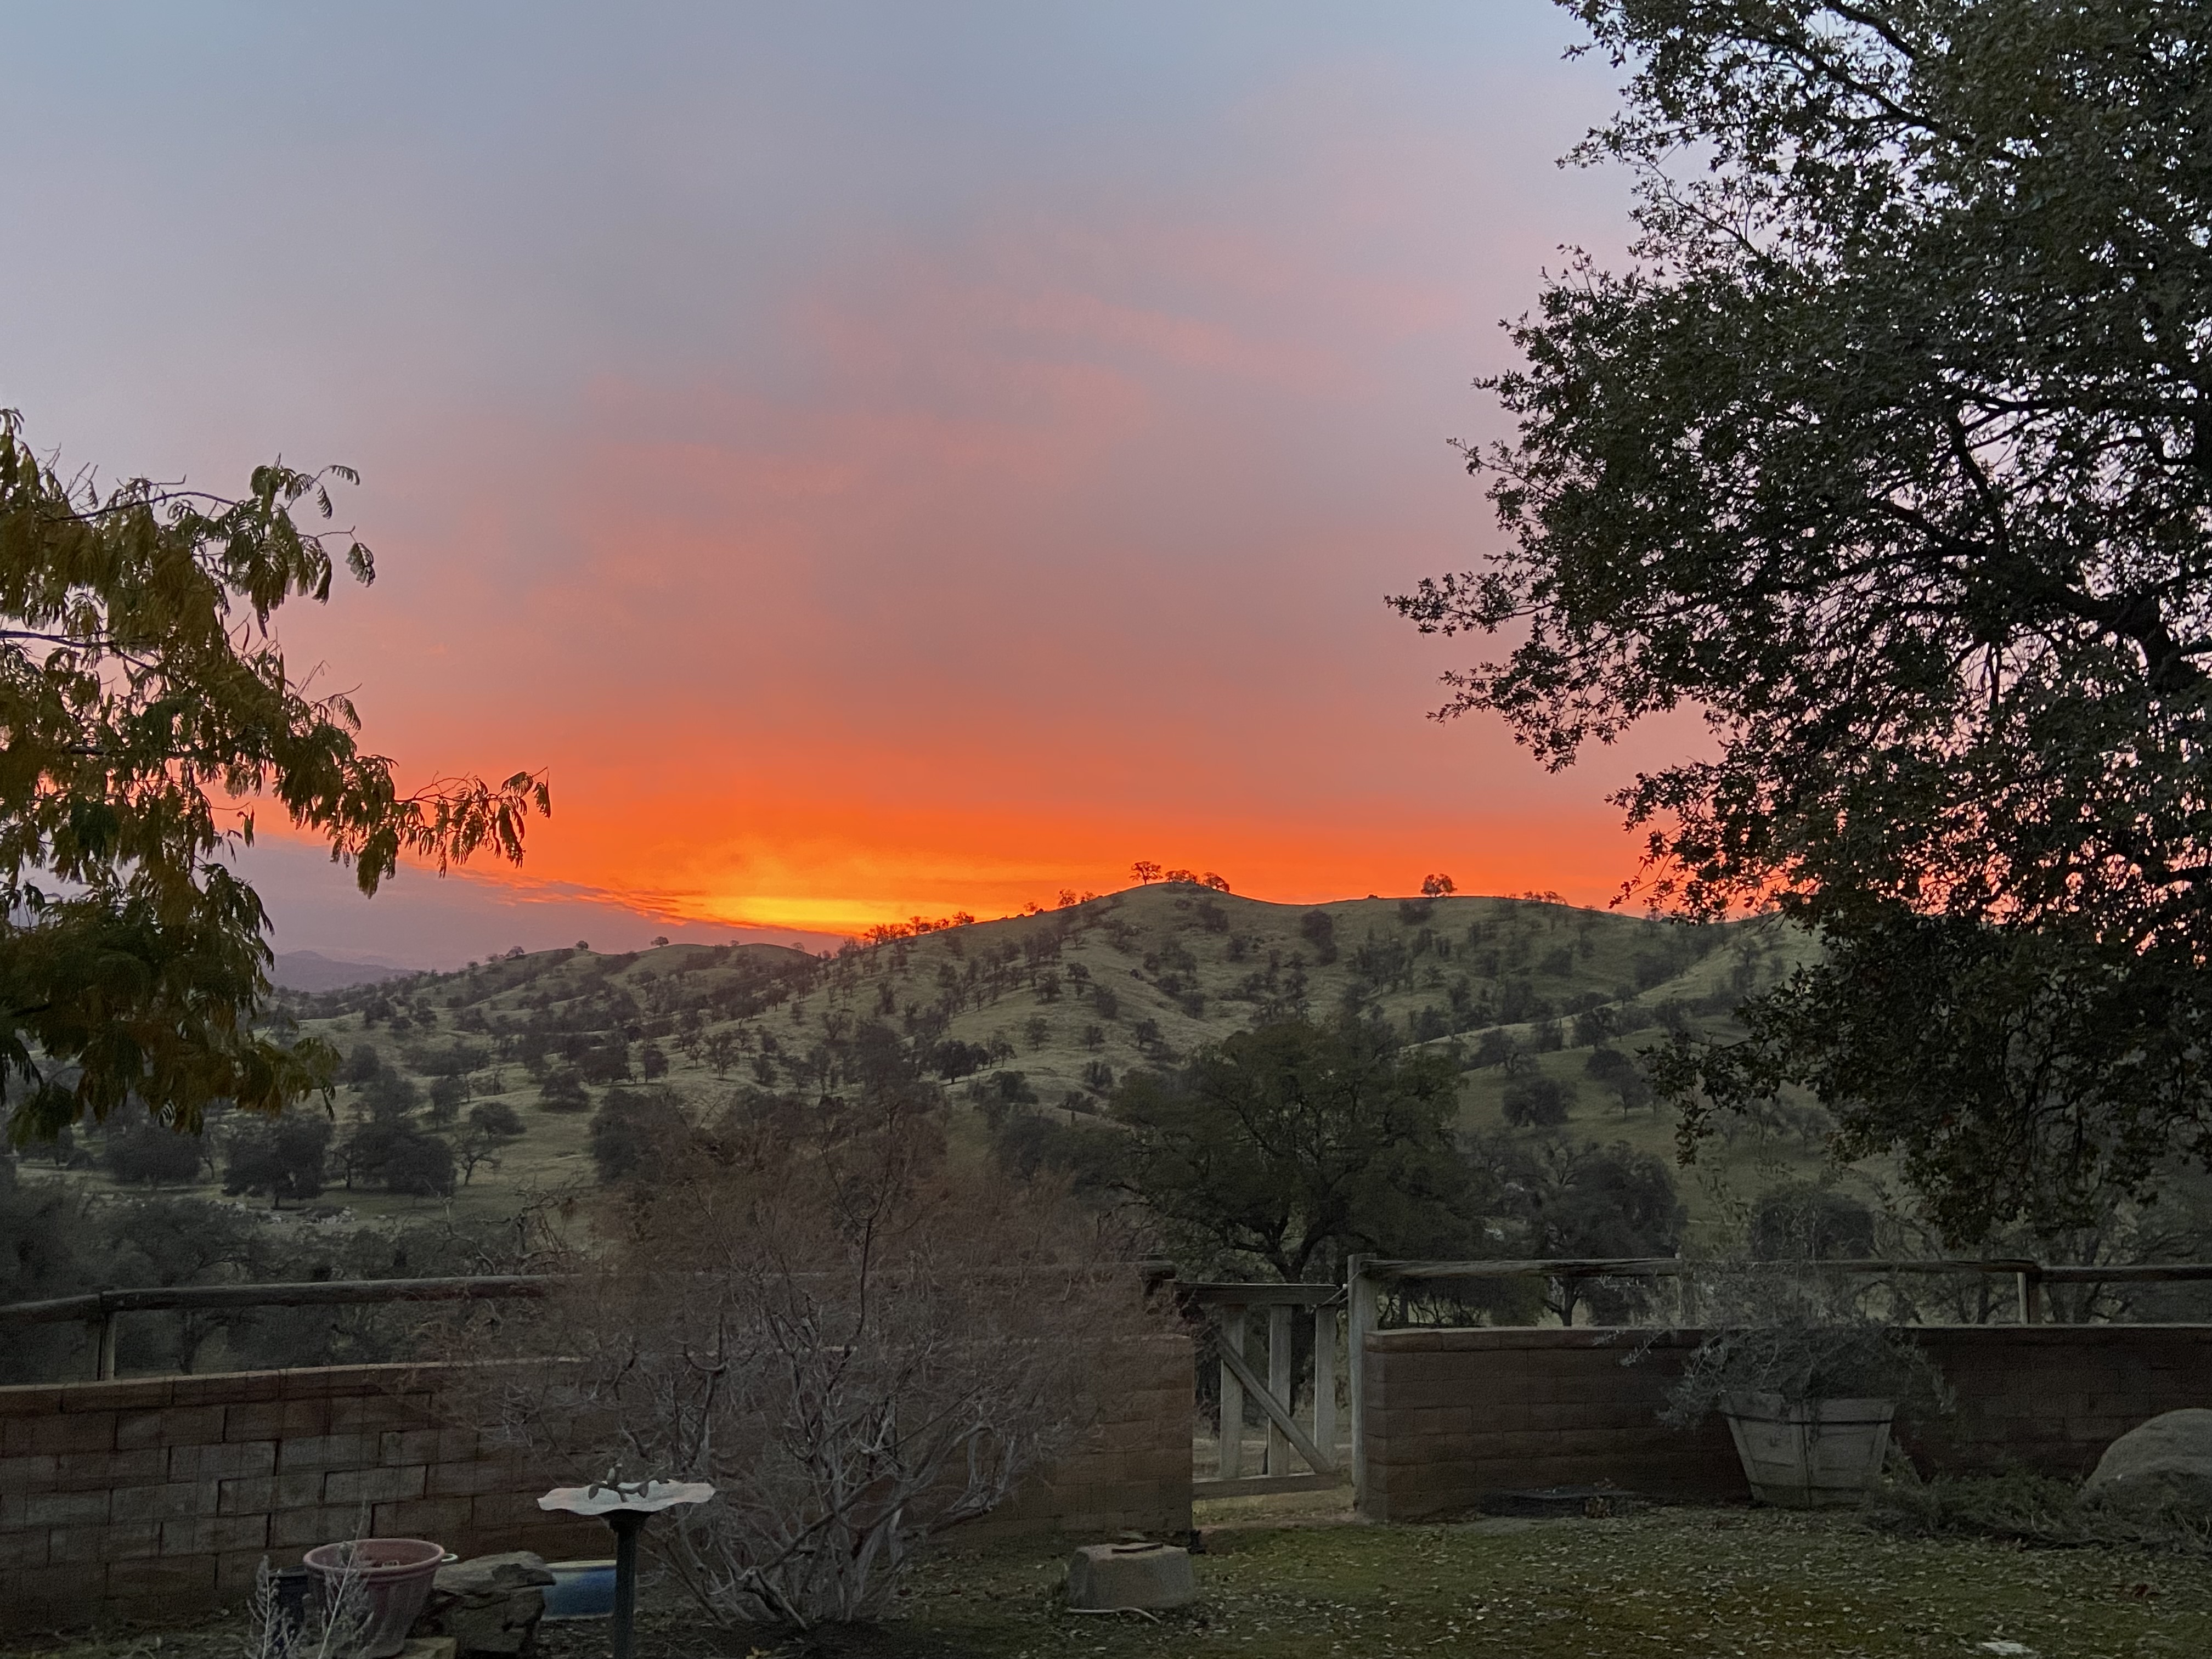 Sunrise at the ranch